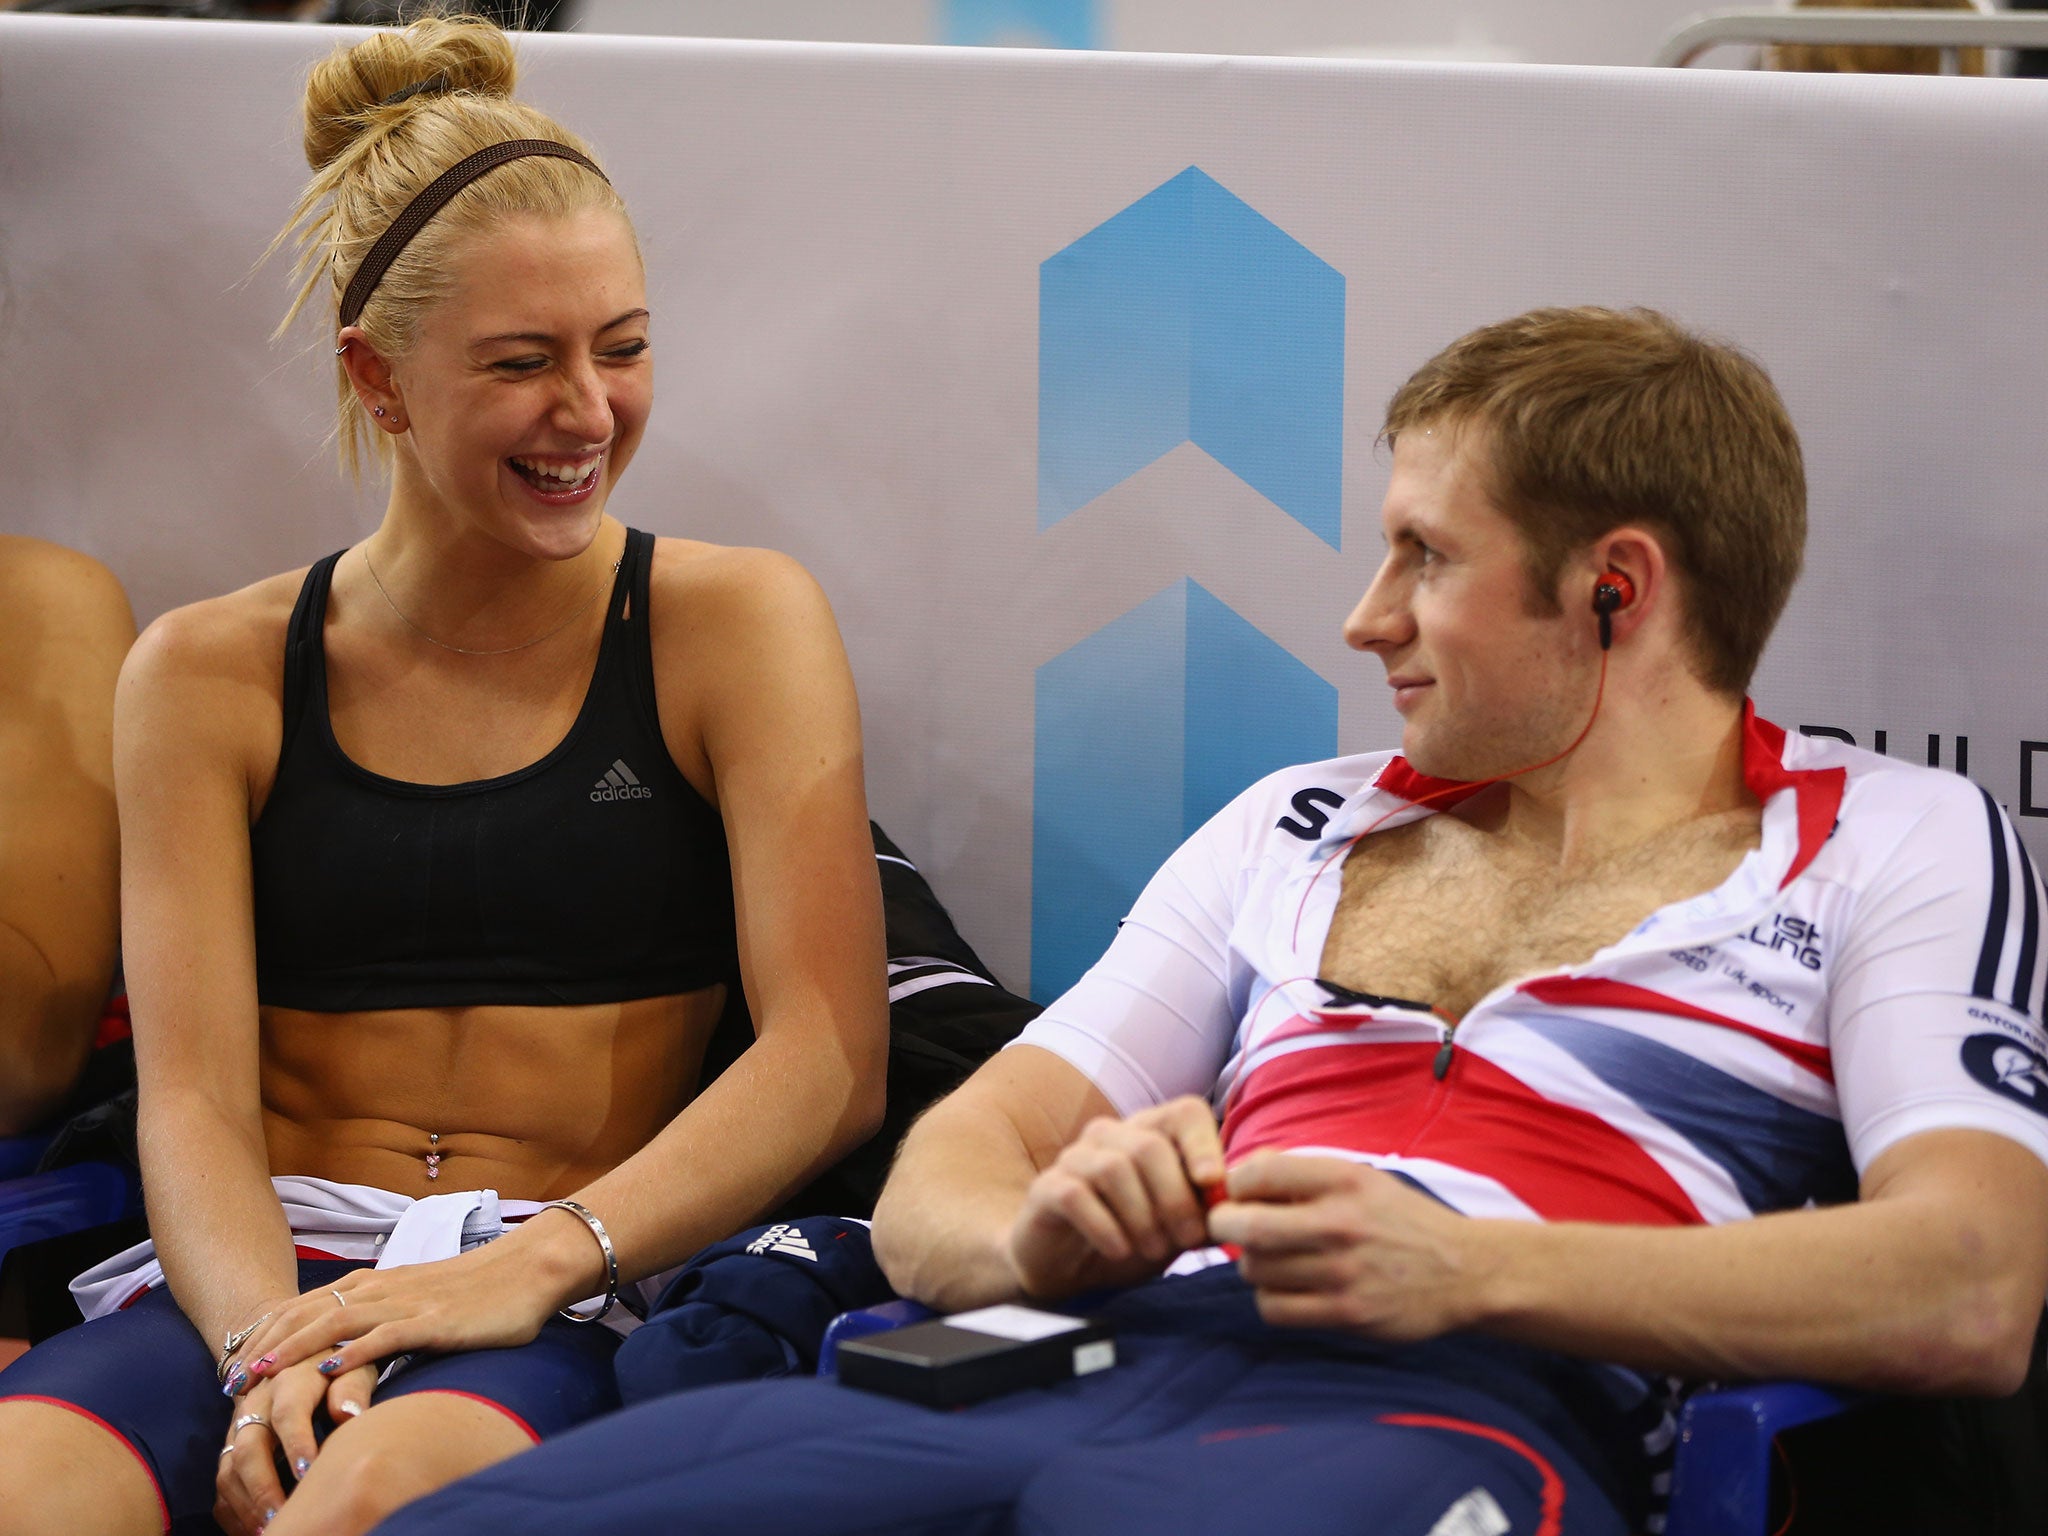 Laura Trott and Jason Kenny are preparing for the Commonwealth Games in Glasgow